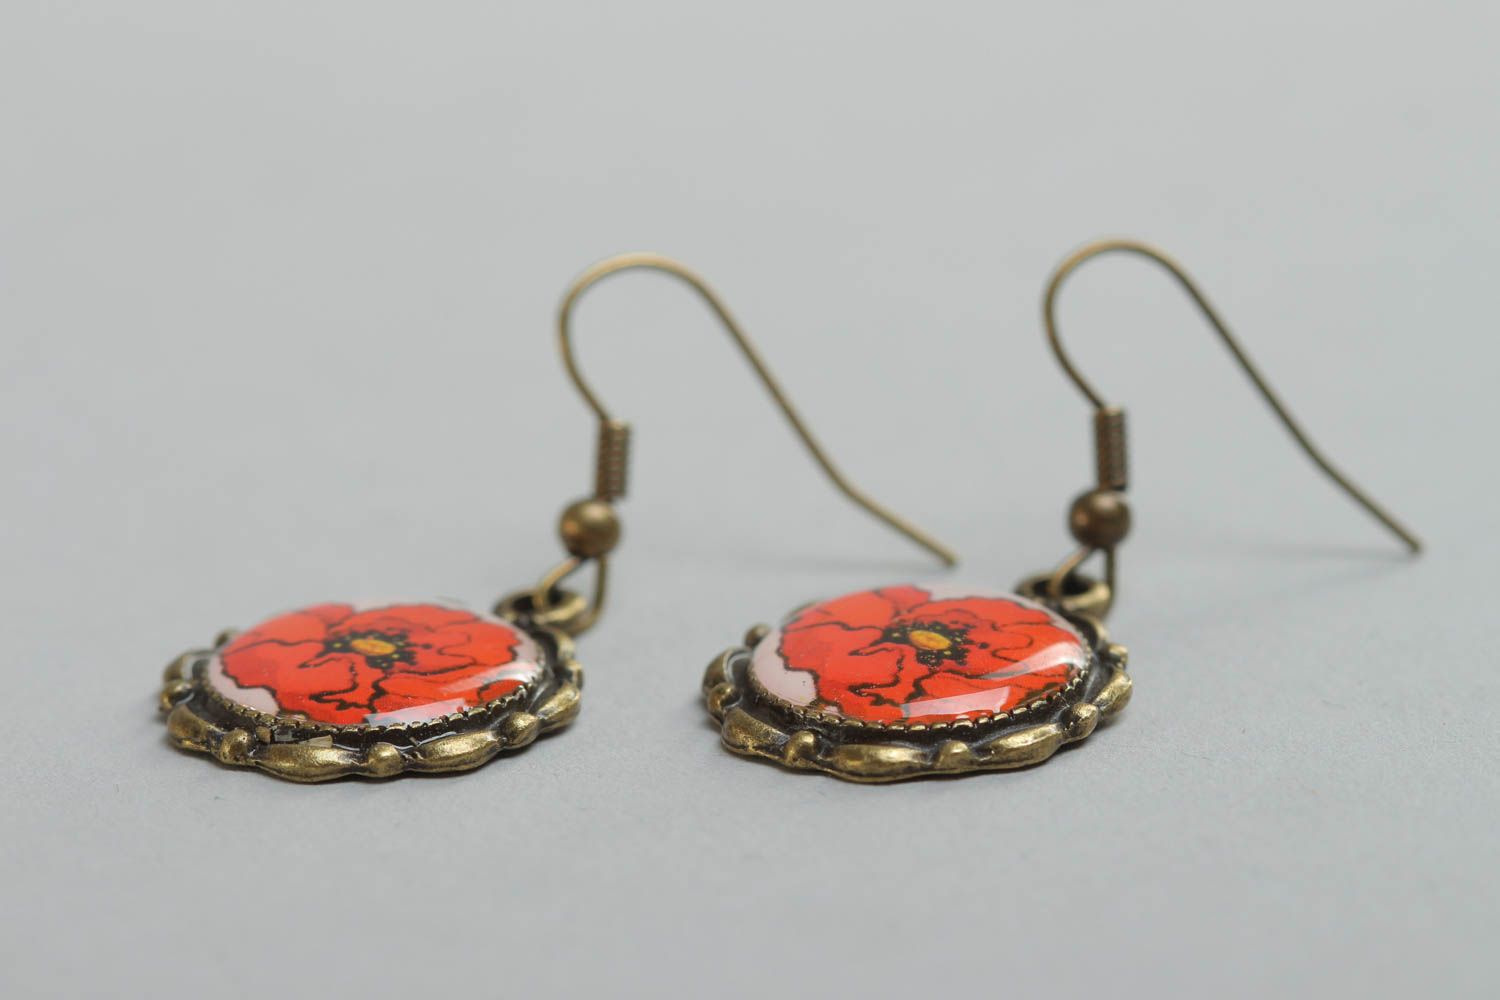 Handcrafted beautiful vintage earrings made of glass glaze with red poppies photo 3